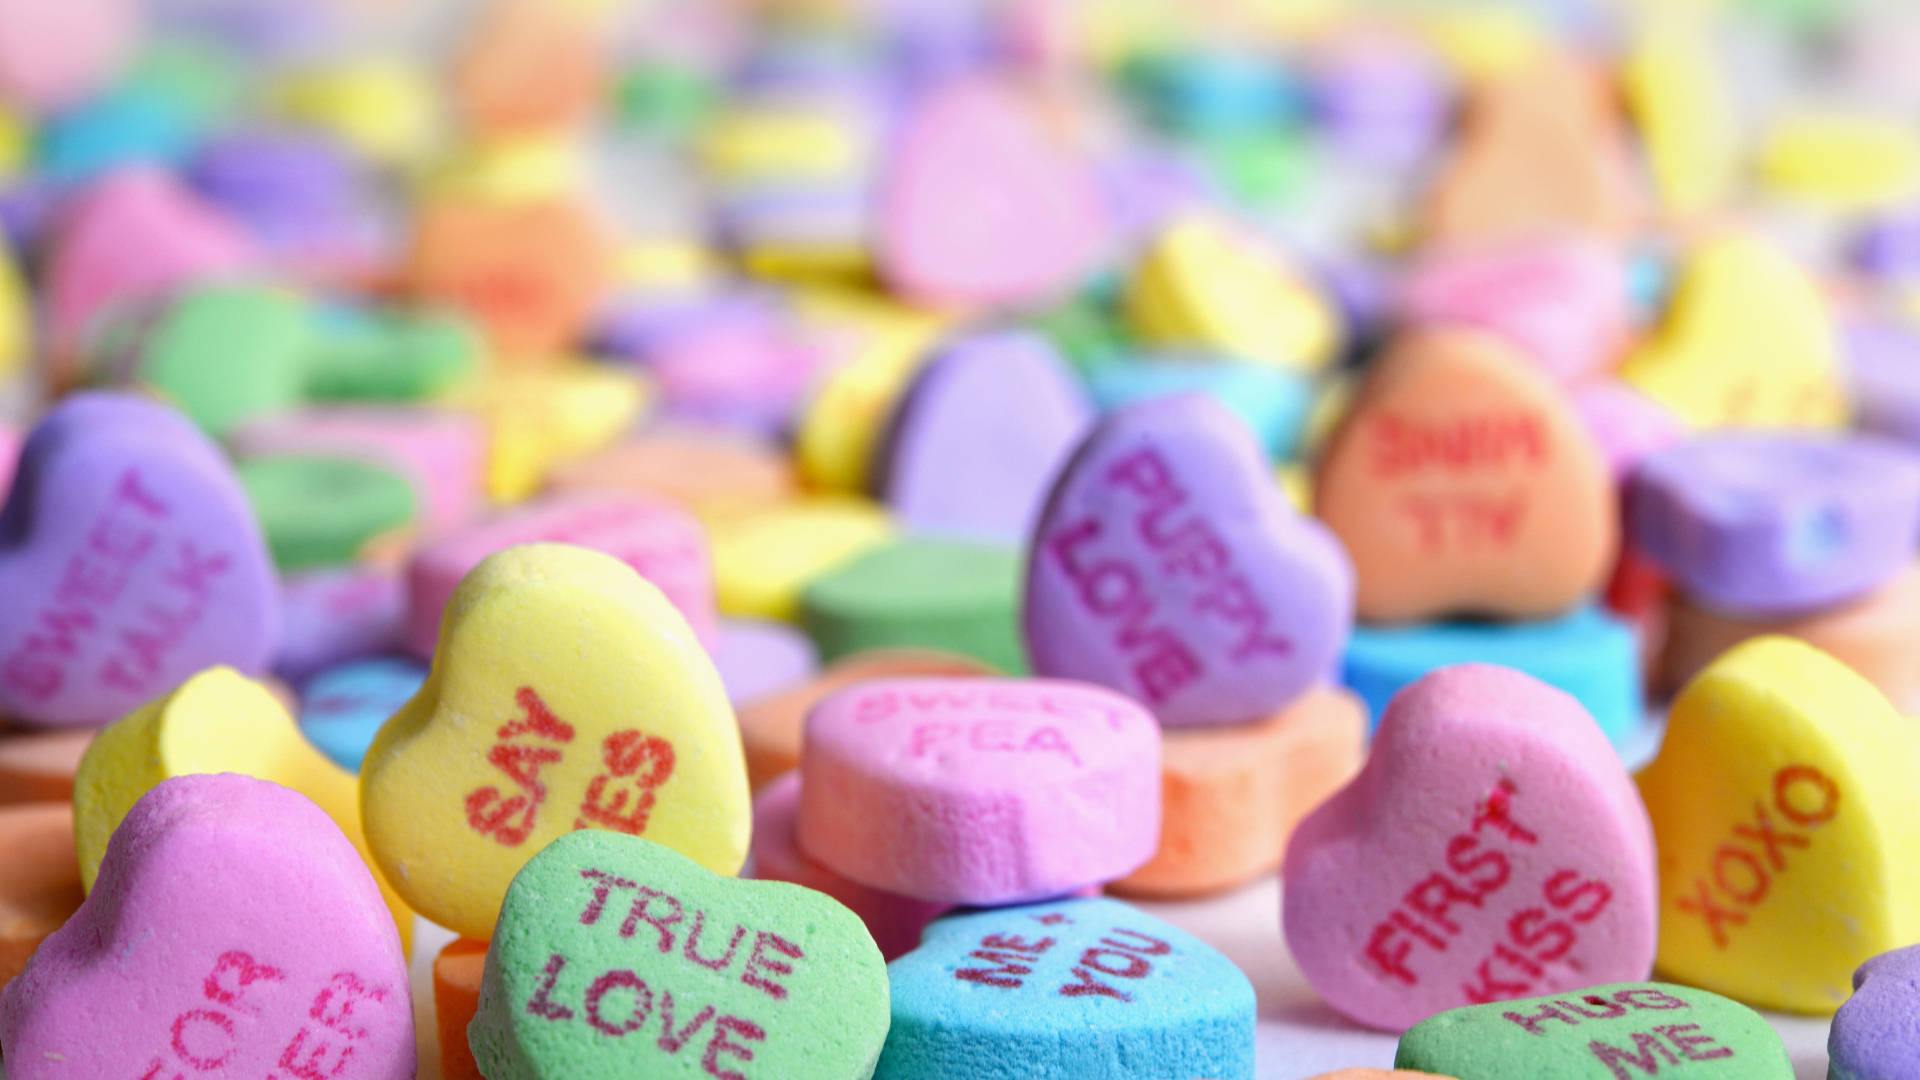 Spread The Love This Season With Colorful Pastel Candy Hearts